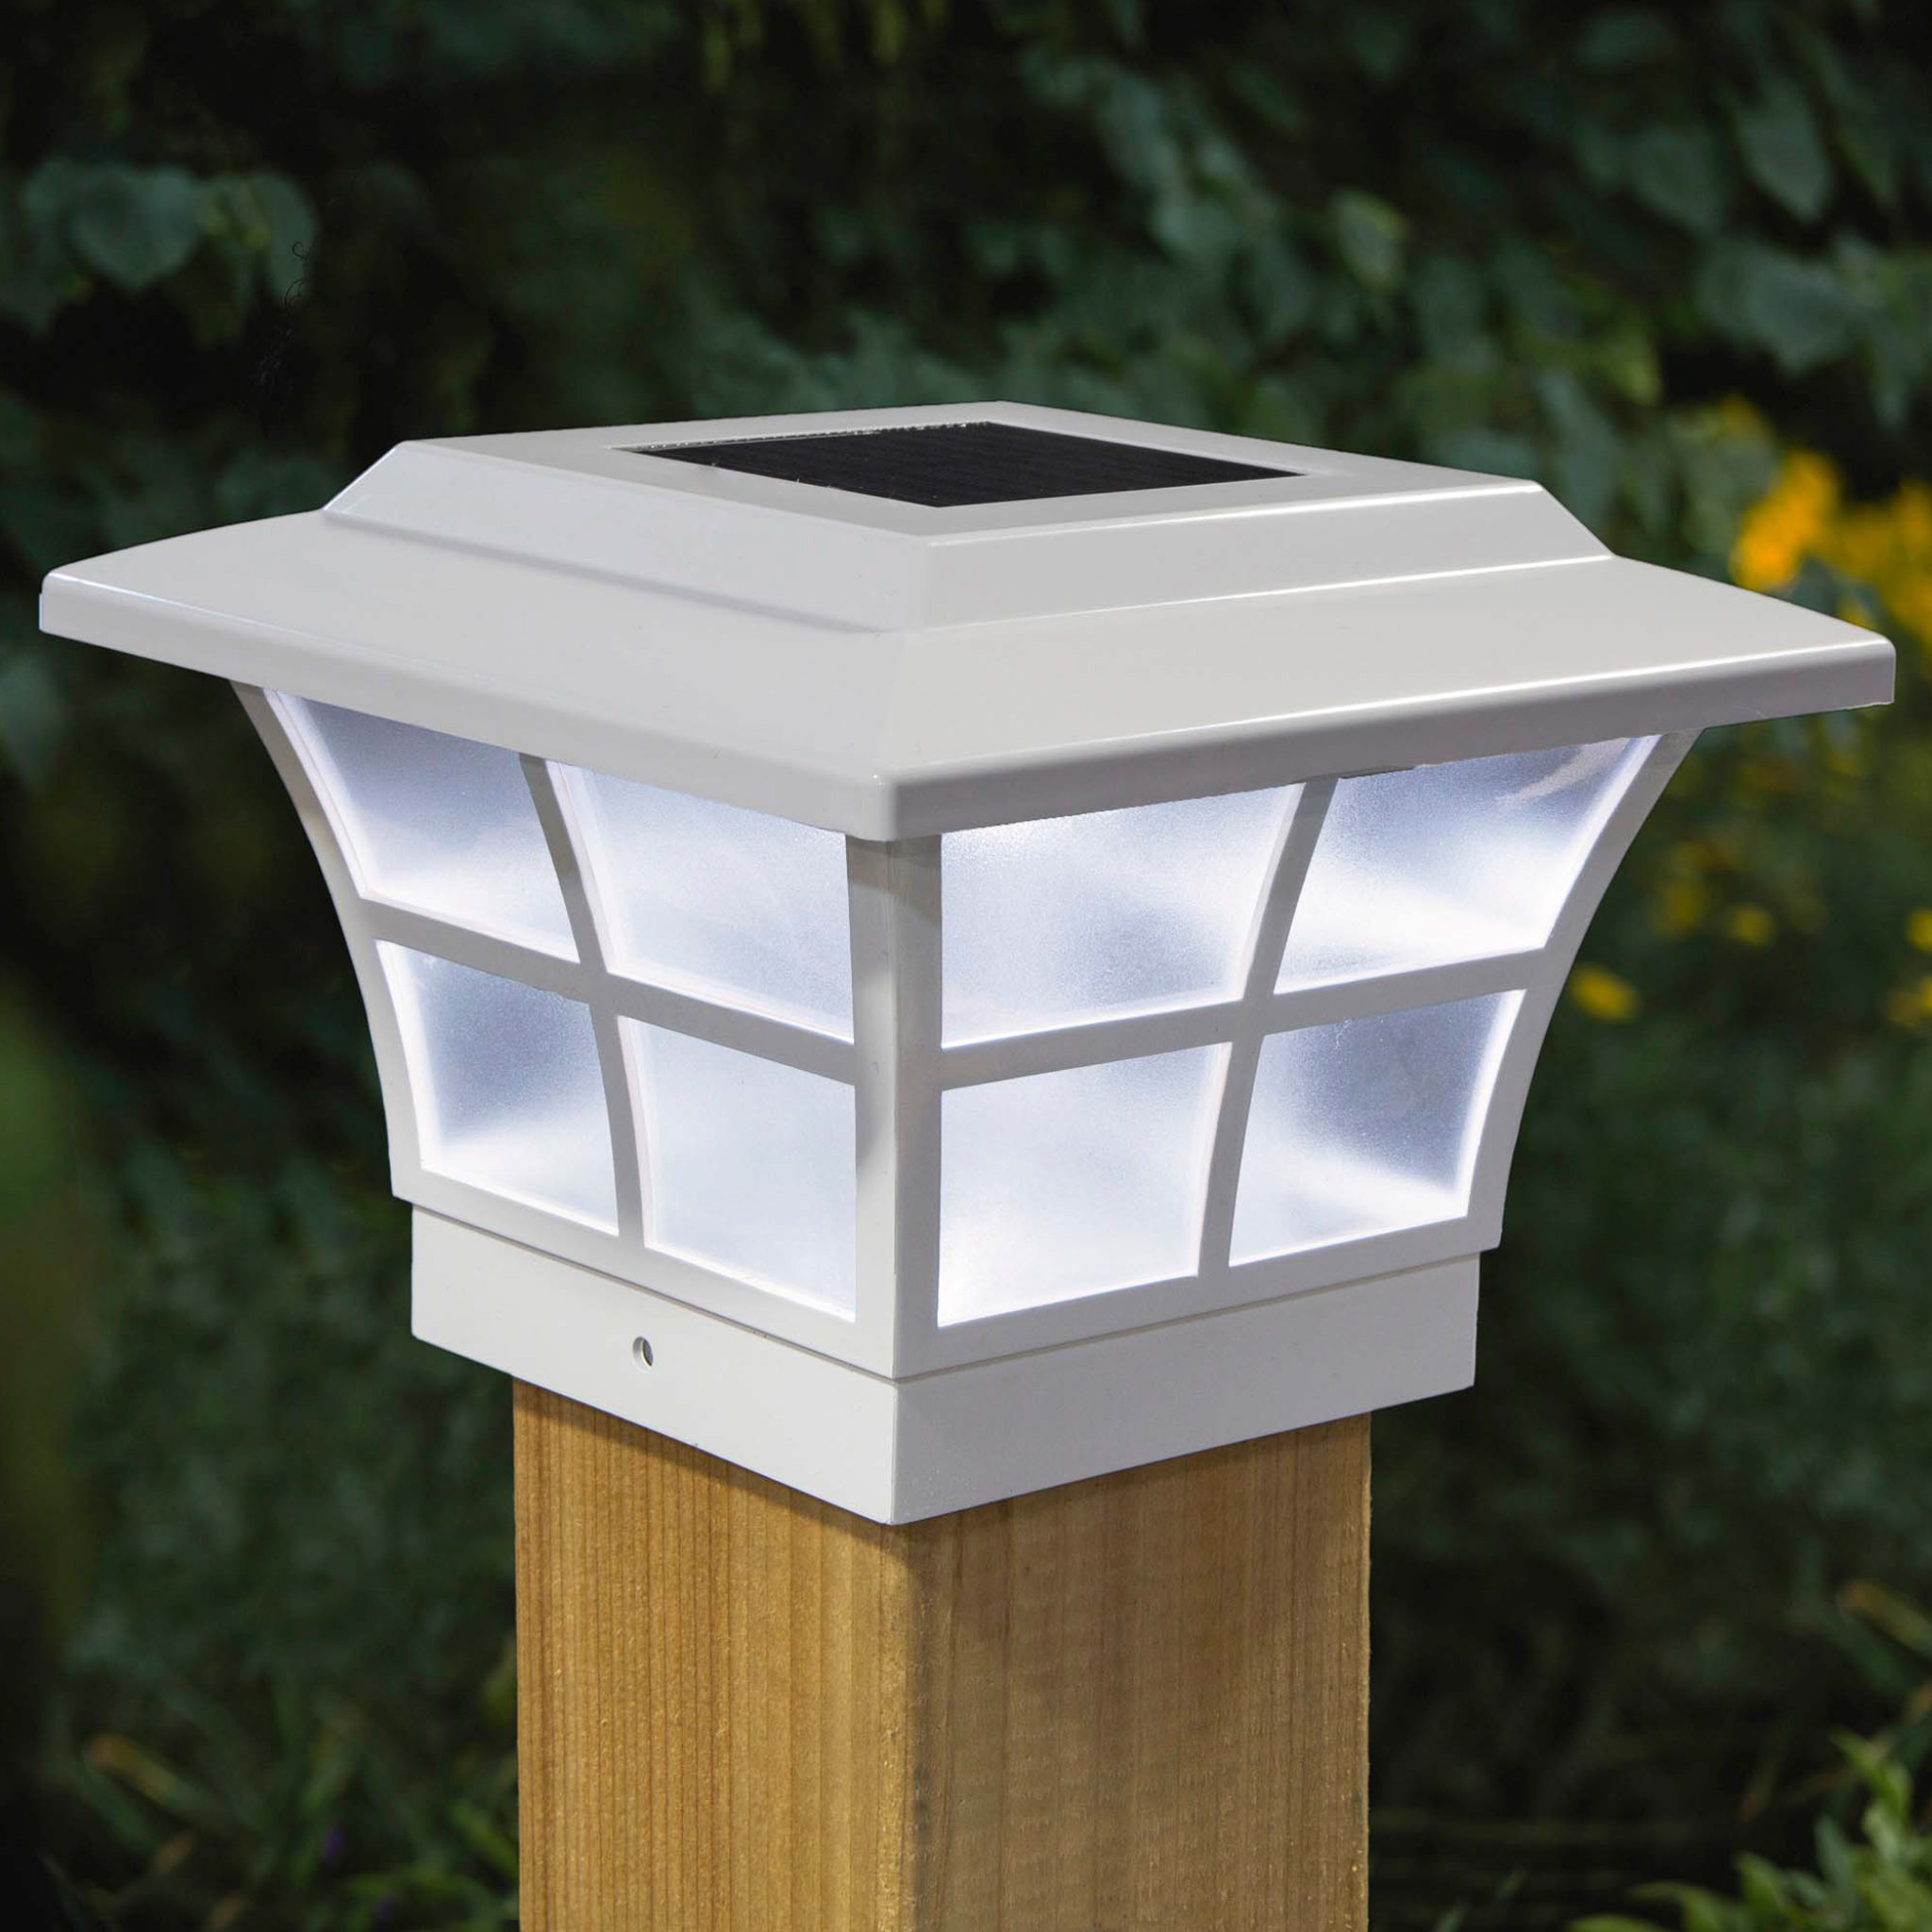 Classy Caps Prestige Solar Powered Integrated LED Fence Post Cap Light  in. x in. with Base Adapter Included  Reviews Wayfair